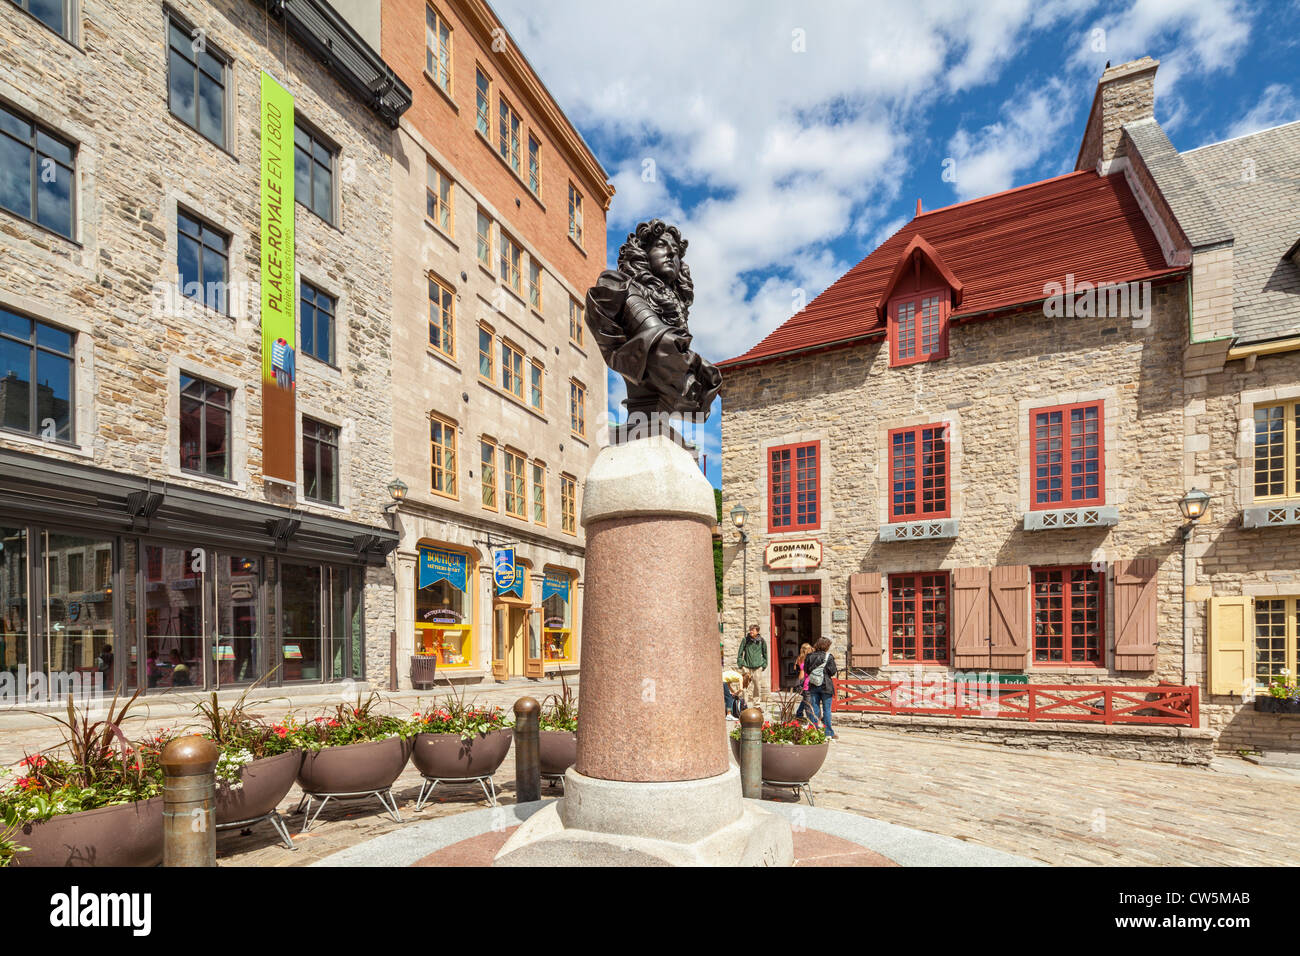 King Louis XIV bust, Royal Place, Quebec City Stock Photo